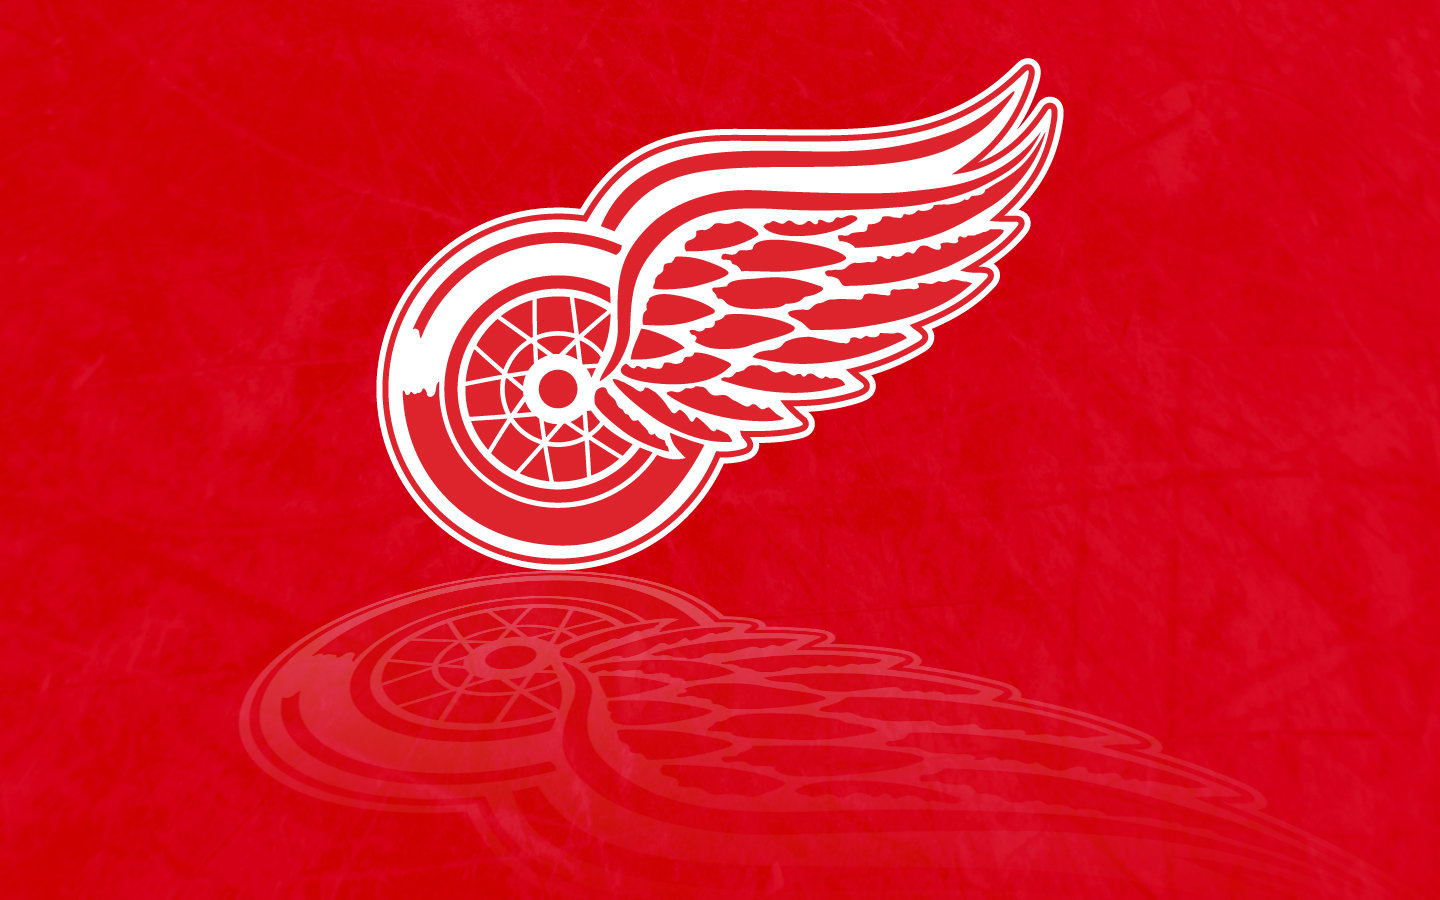 Detroit Red Wings Wallpapers Hd For Desktop Backgrounds